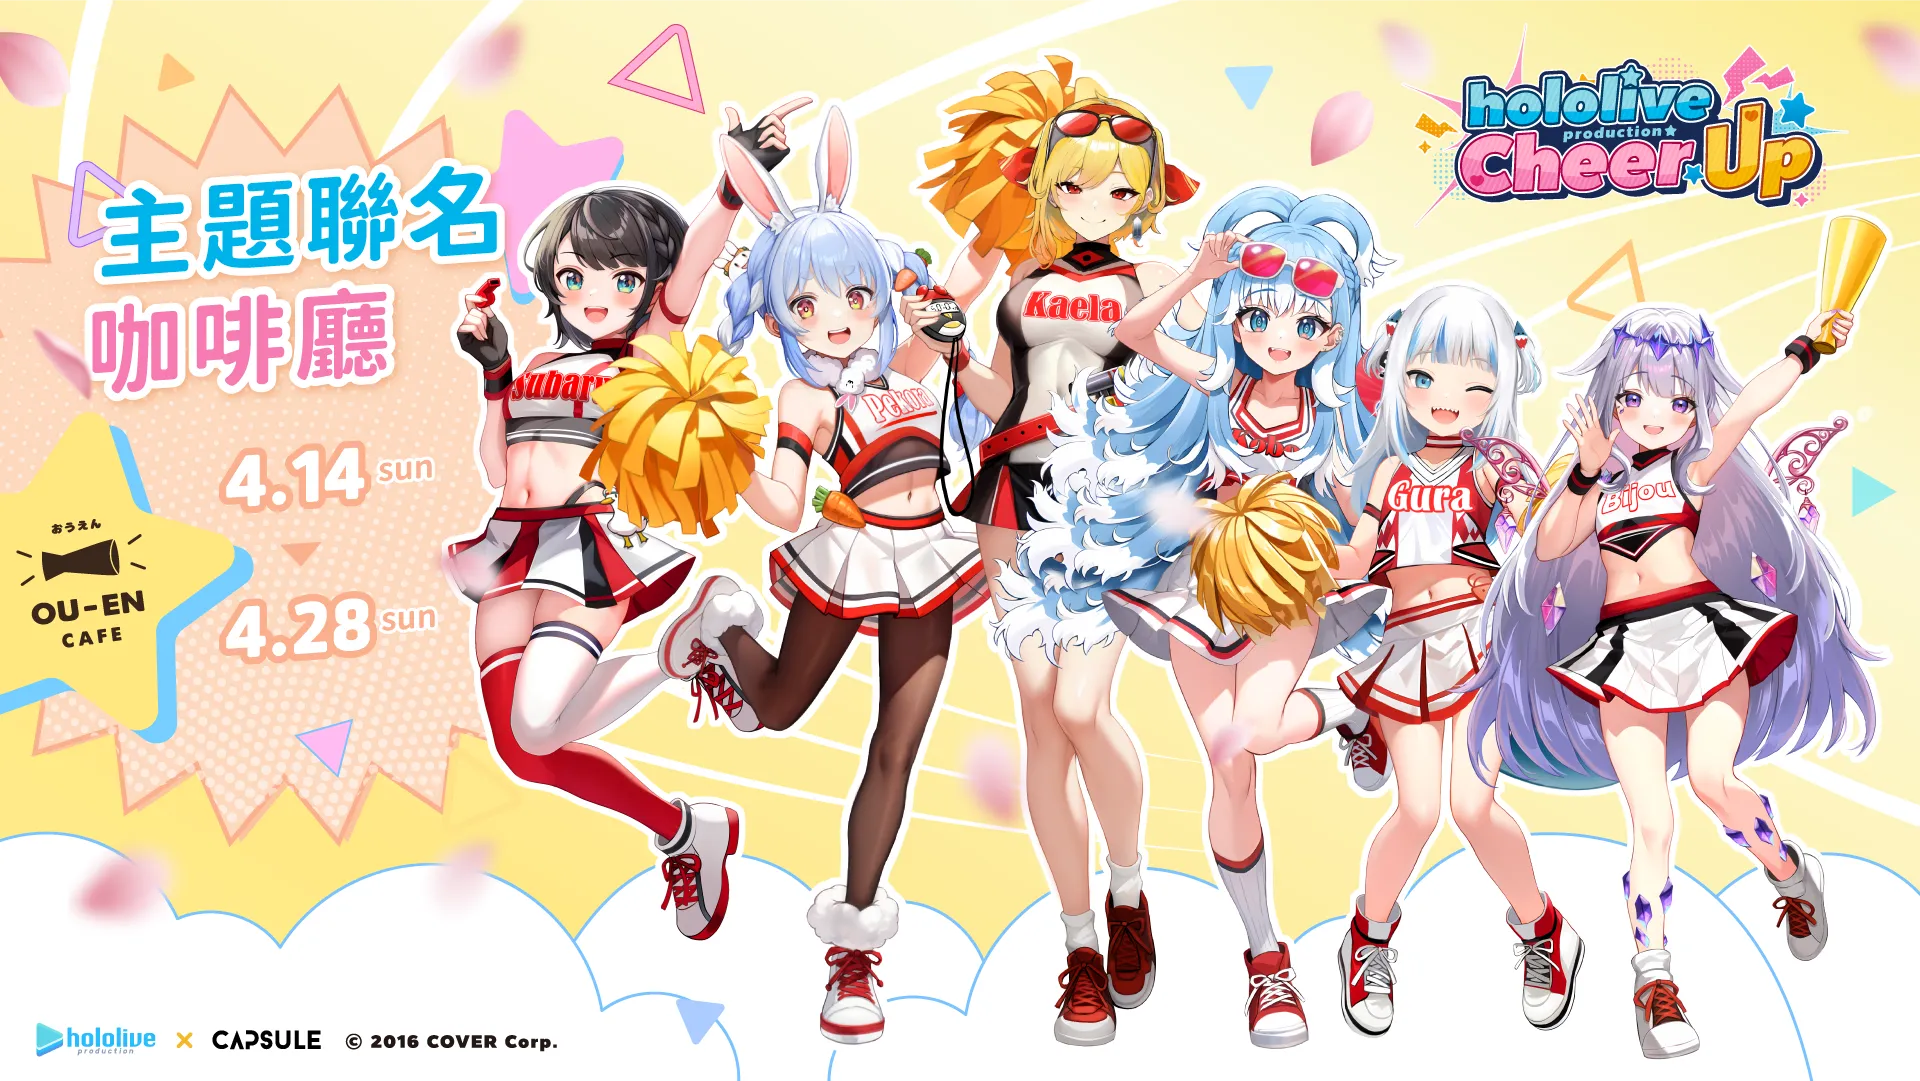 hololive production x CAPSULE Cheer UP Road Run and  Collaboration Café will be held in Taiwan.